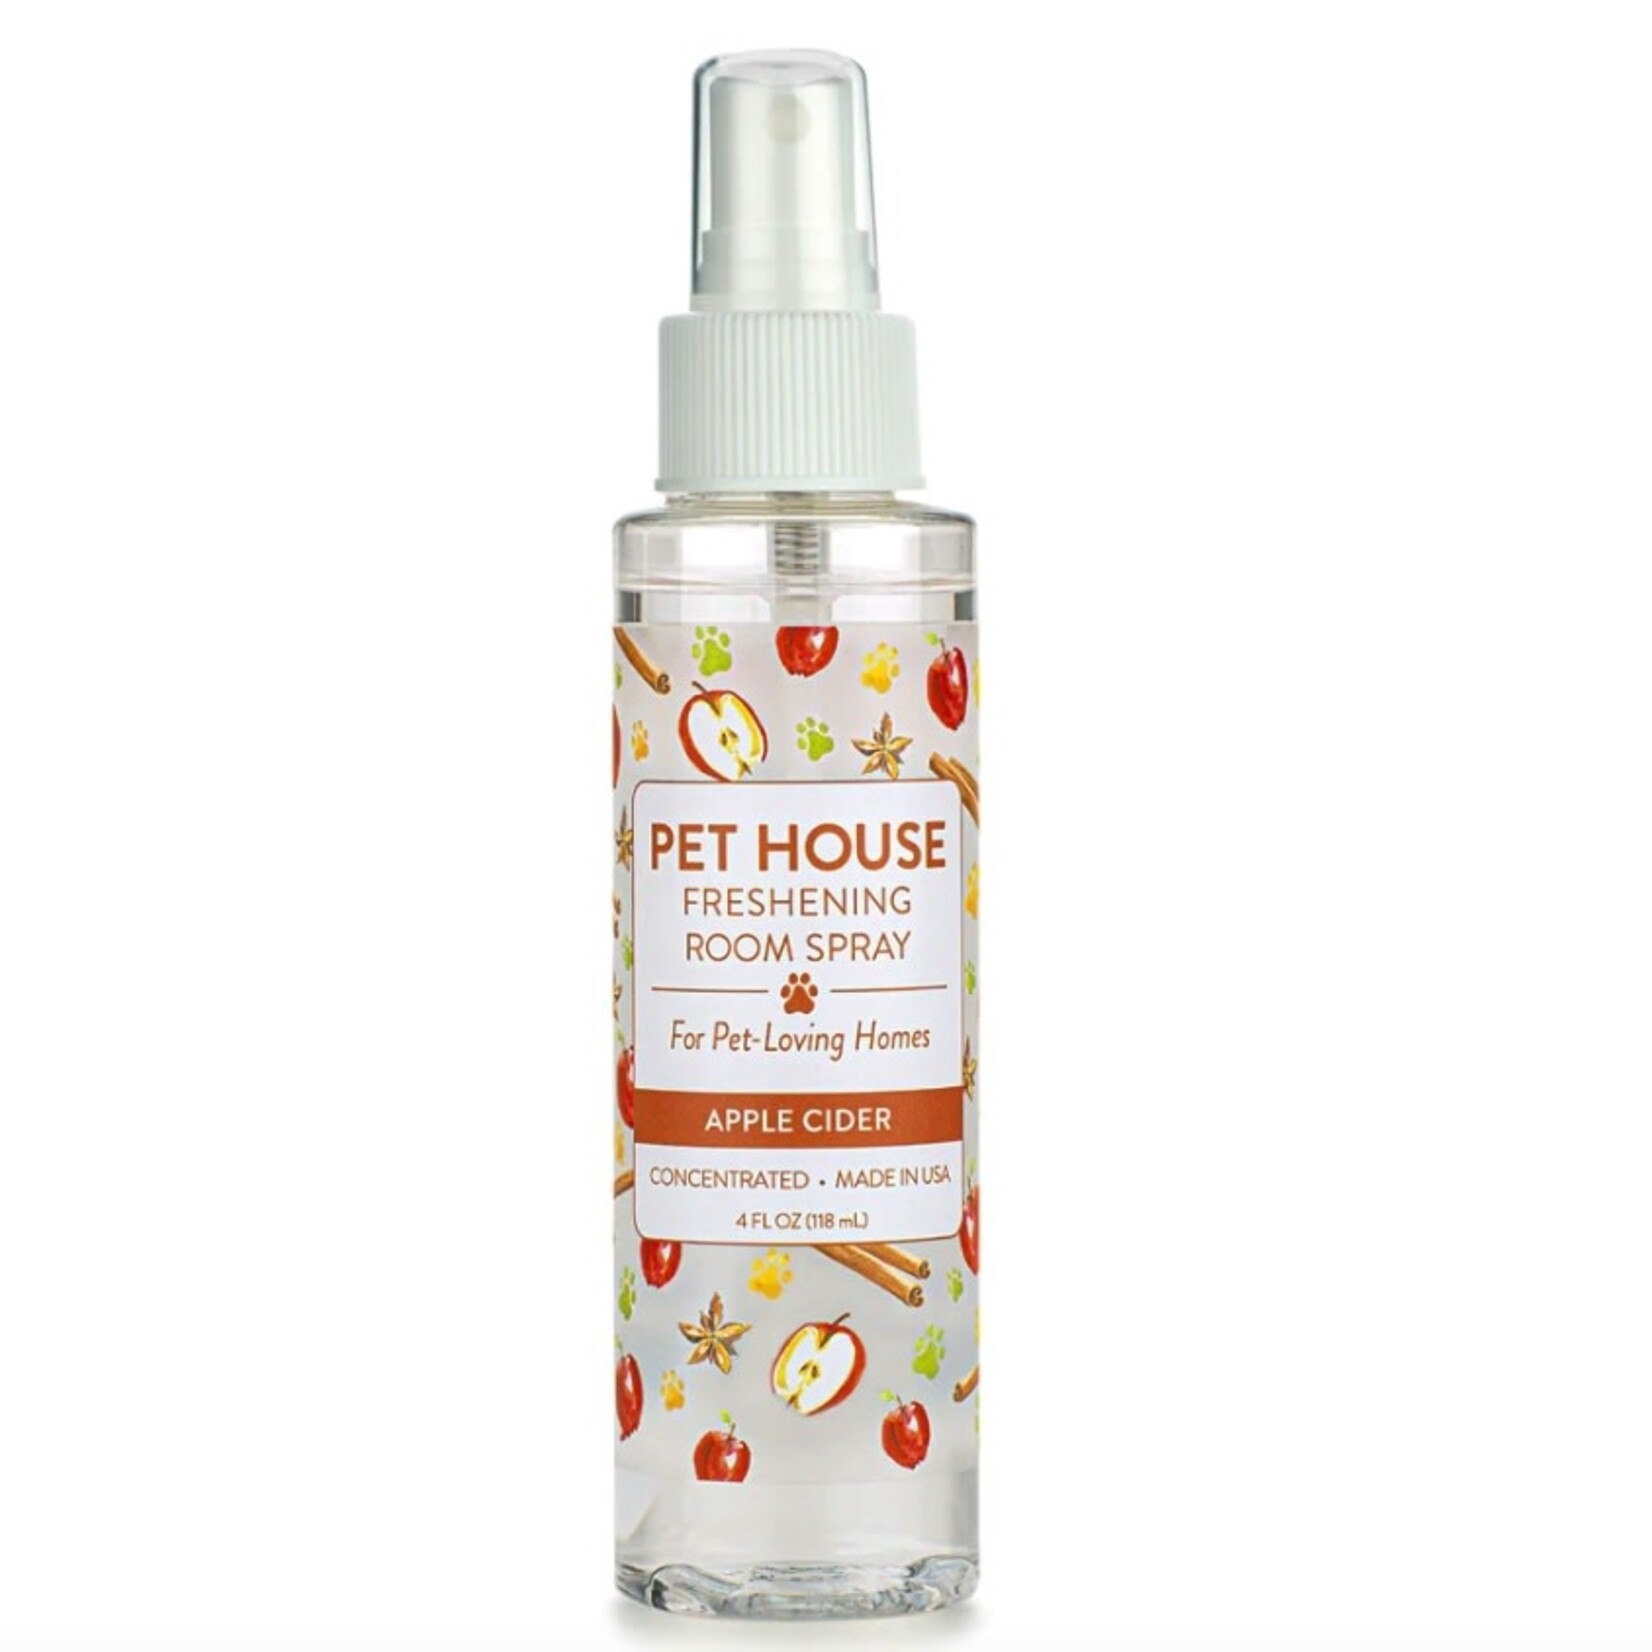 PET HOUSE CANDLE PET HOUSE ROOM SPRAY APPLE CIDER